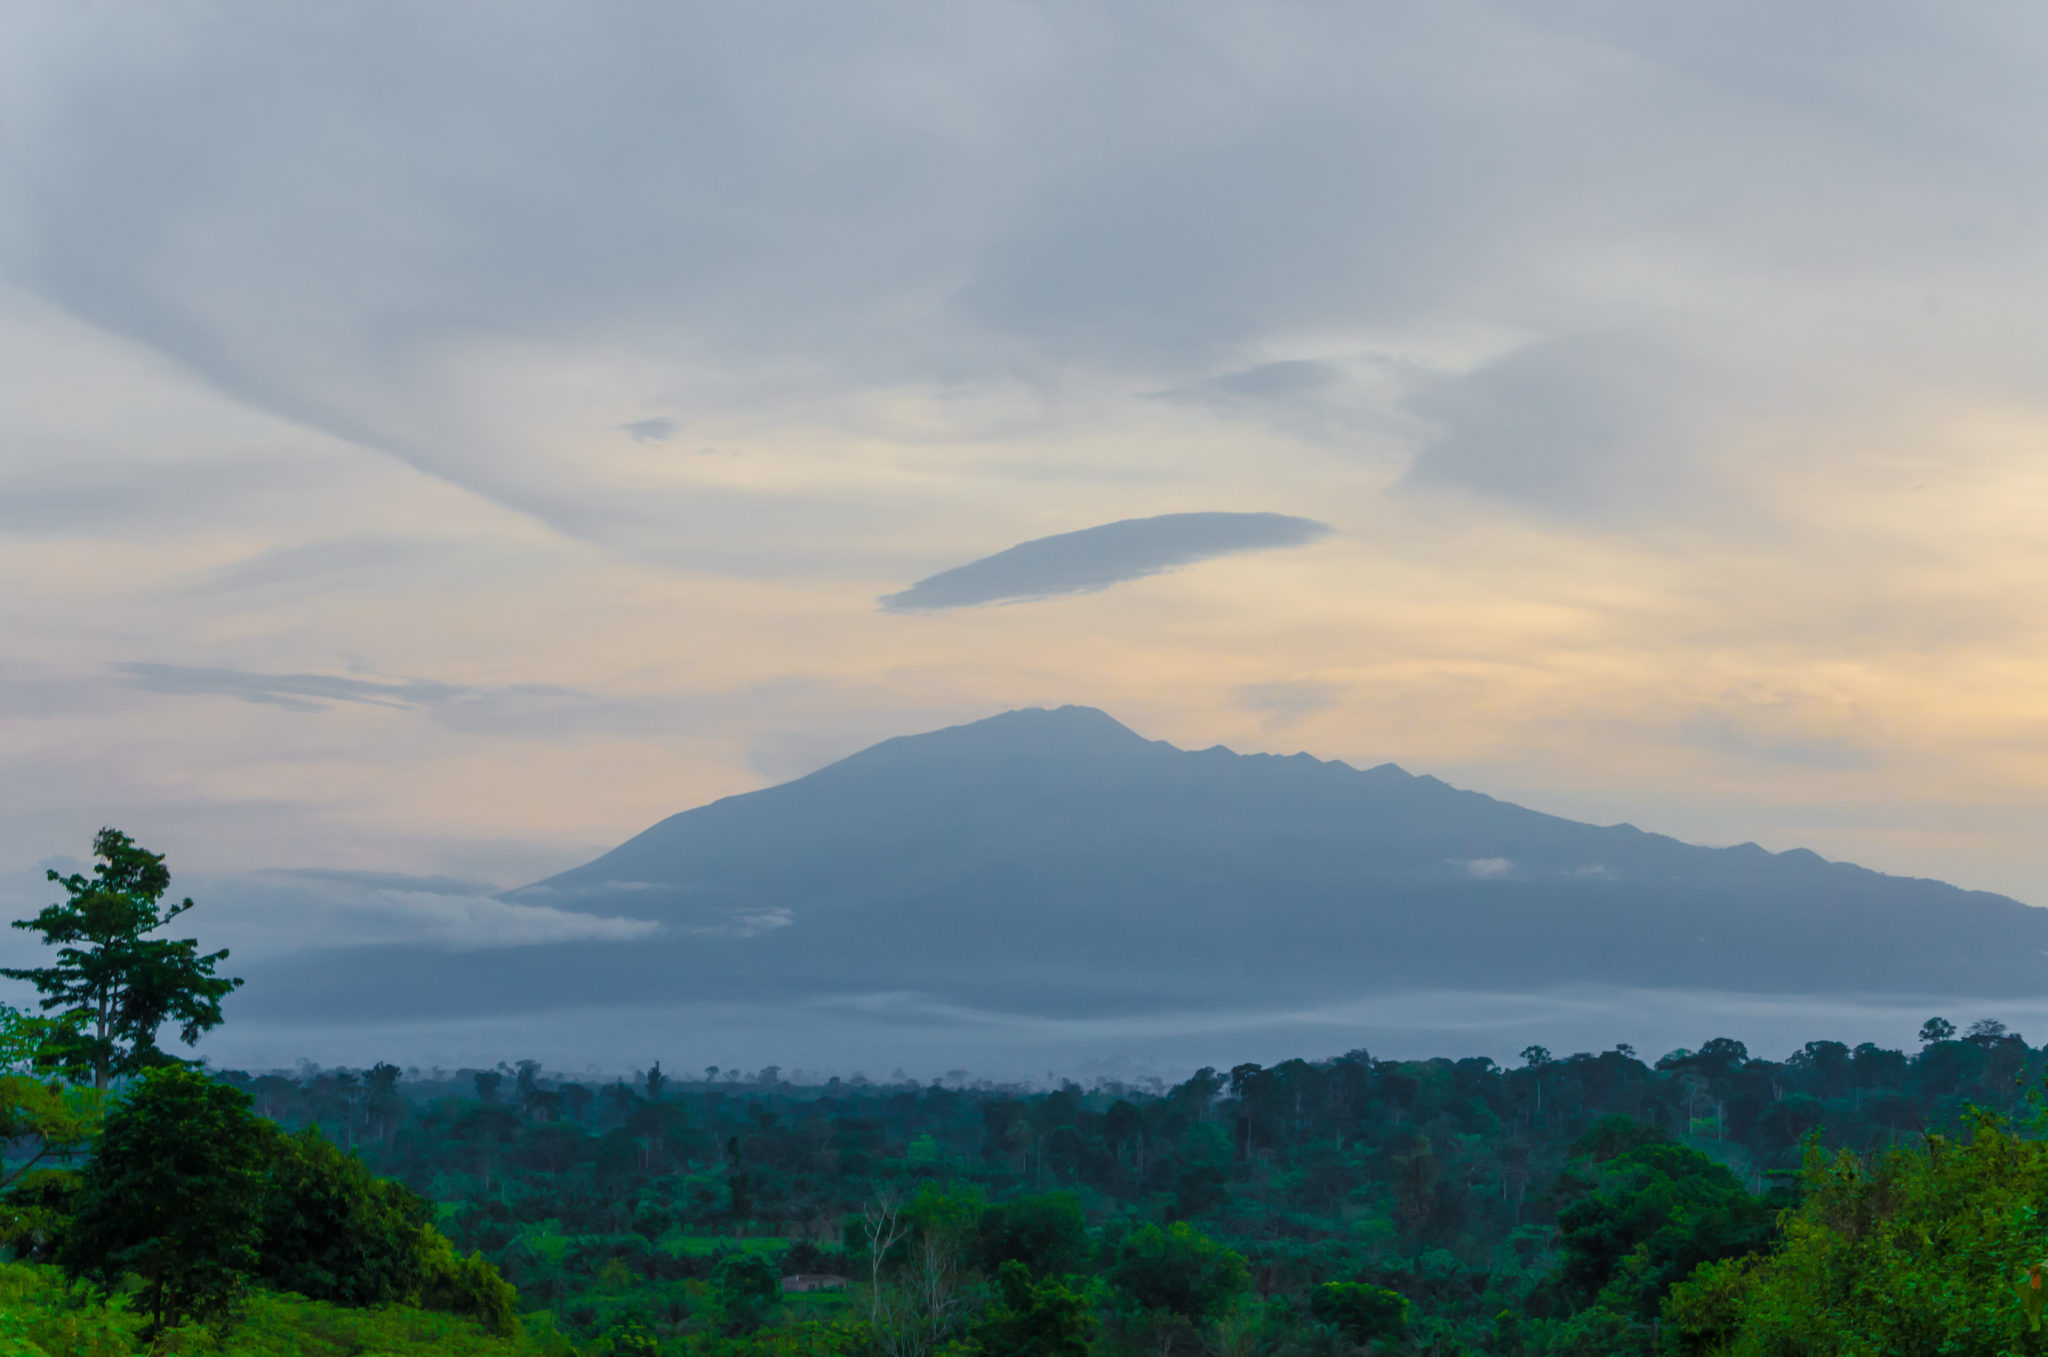 Mount Cameroon in the distance during evening light with cloudy sky and rain forest, Africa.